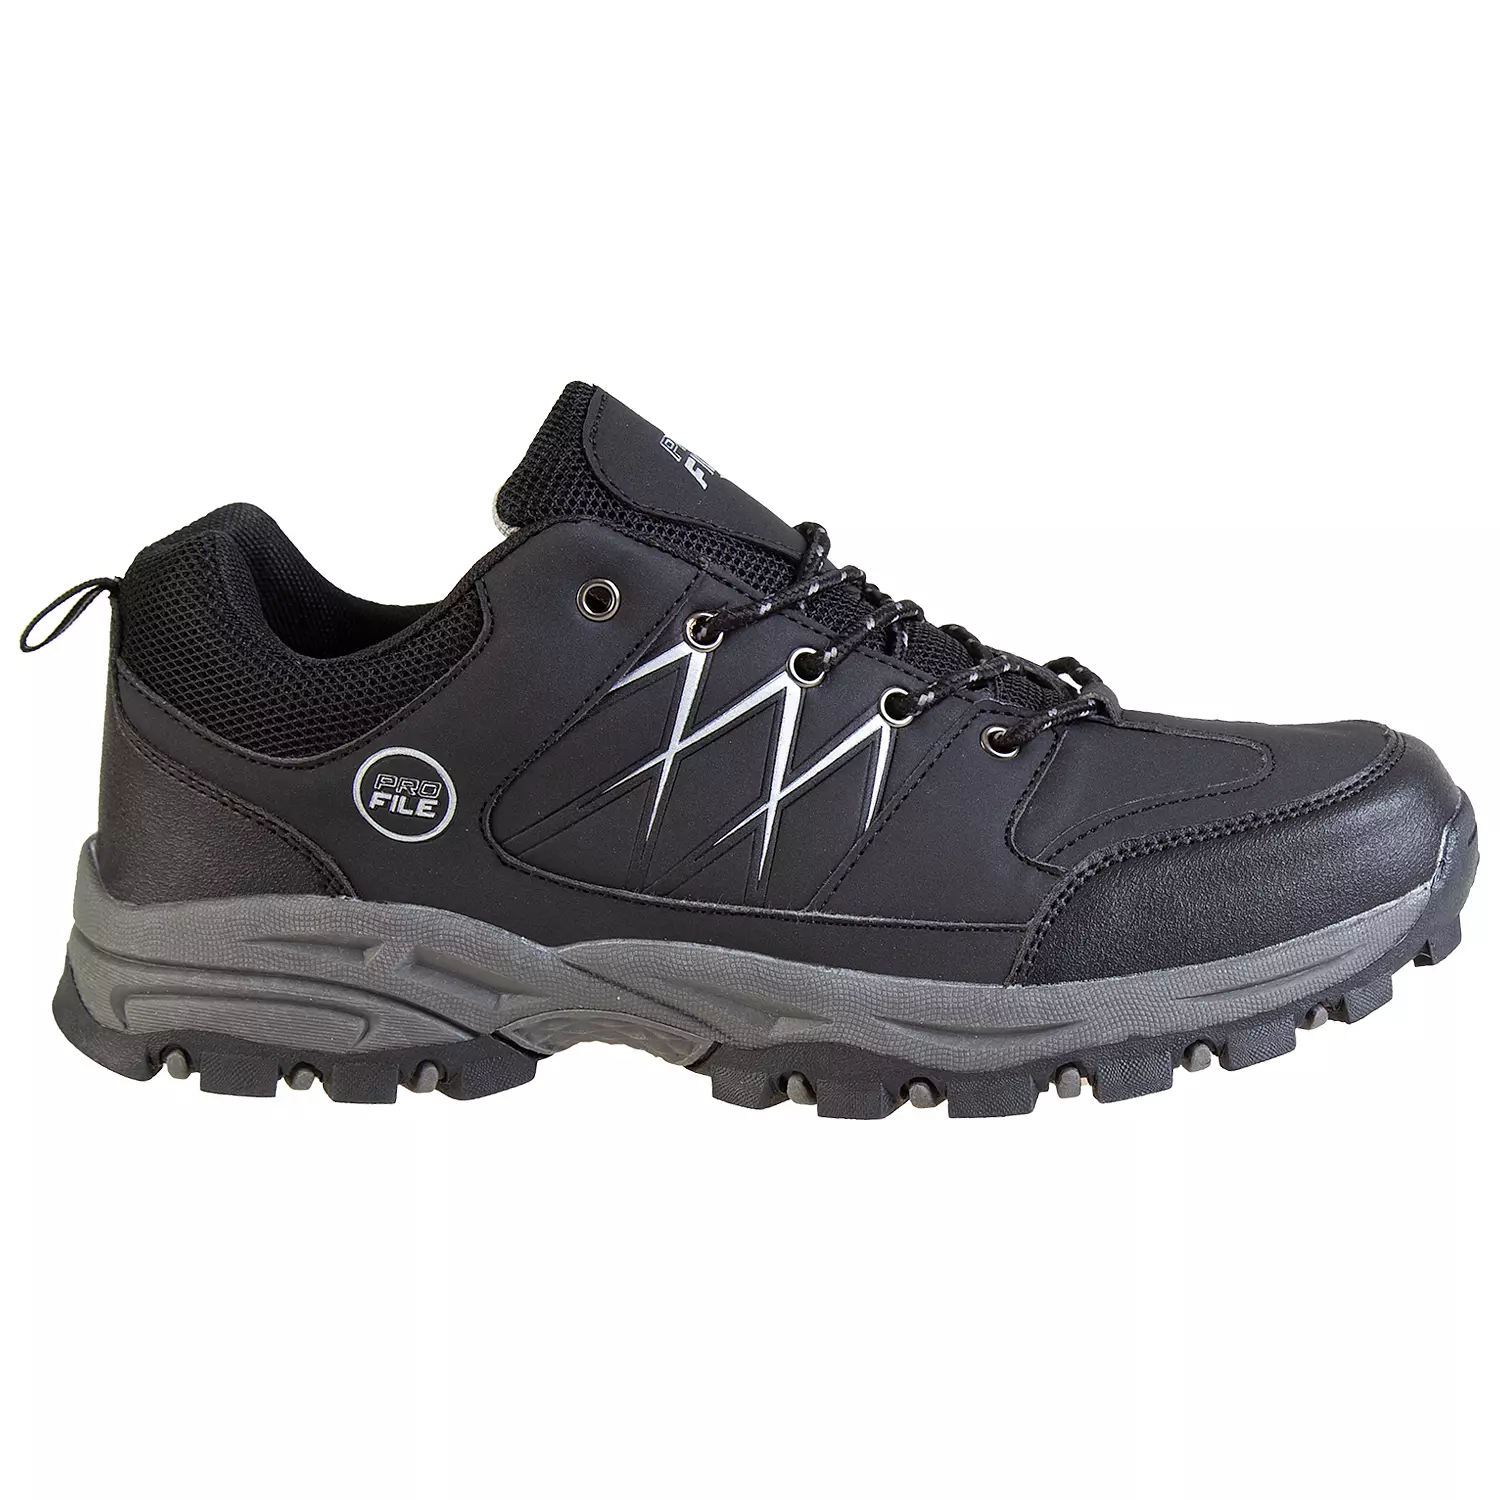 Men's low top hiking shoes with reflective strips, black, size 12